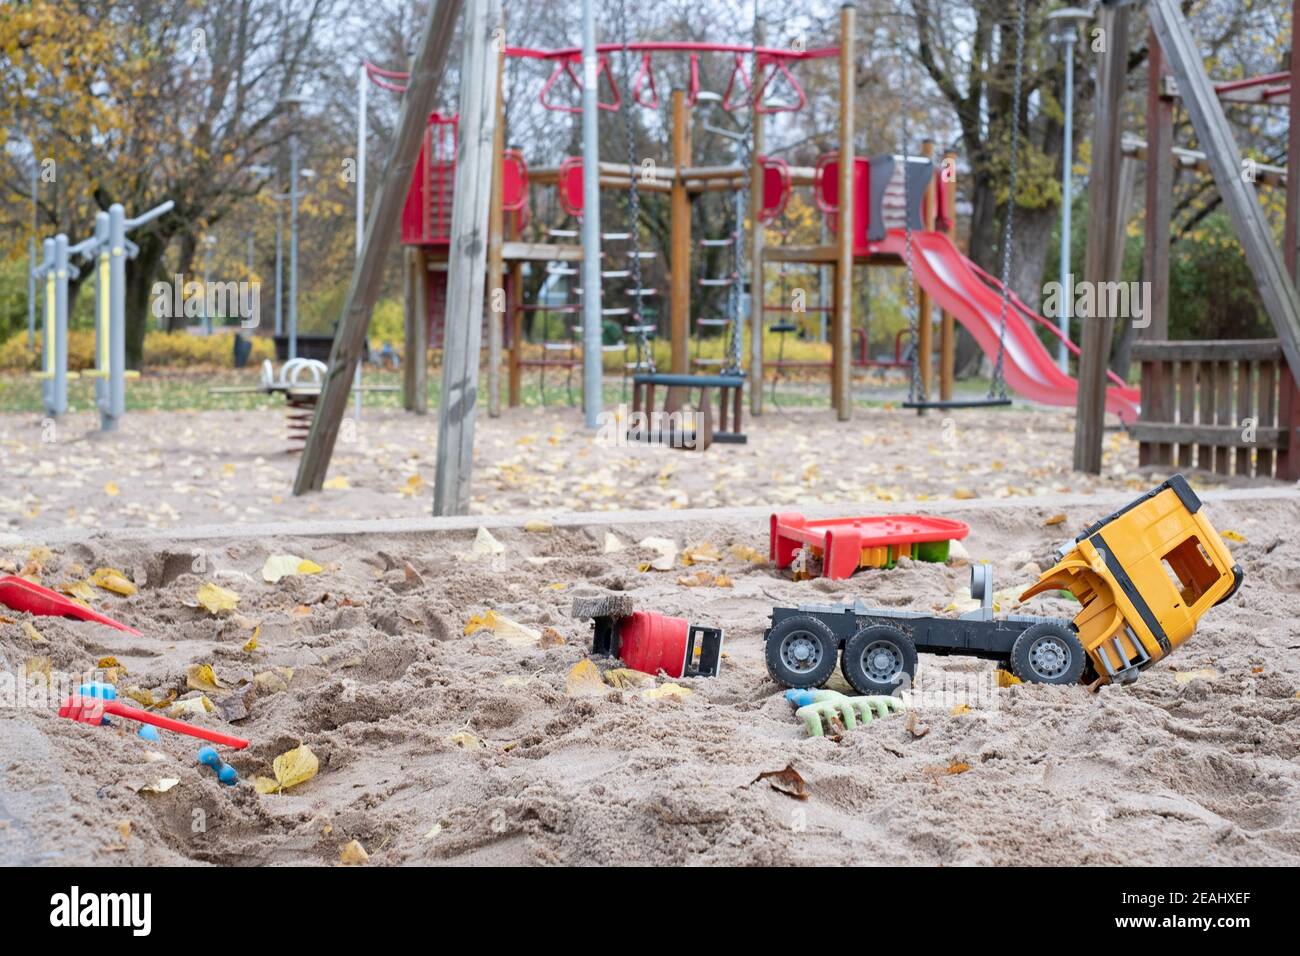 Deserted playground in a city park with broken kids toys during COVID-19 lockdown. Stock Photo